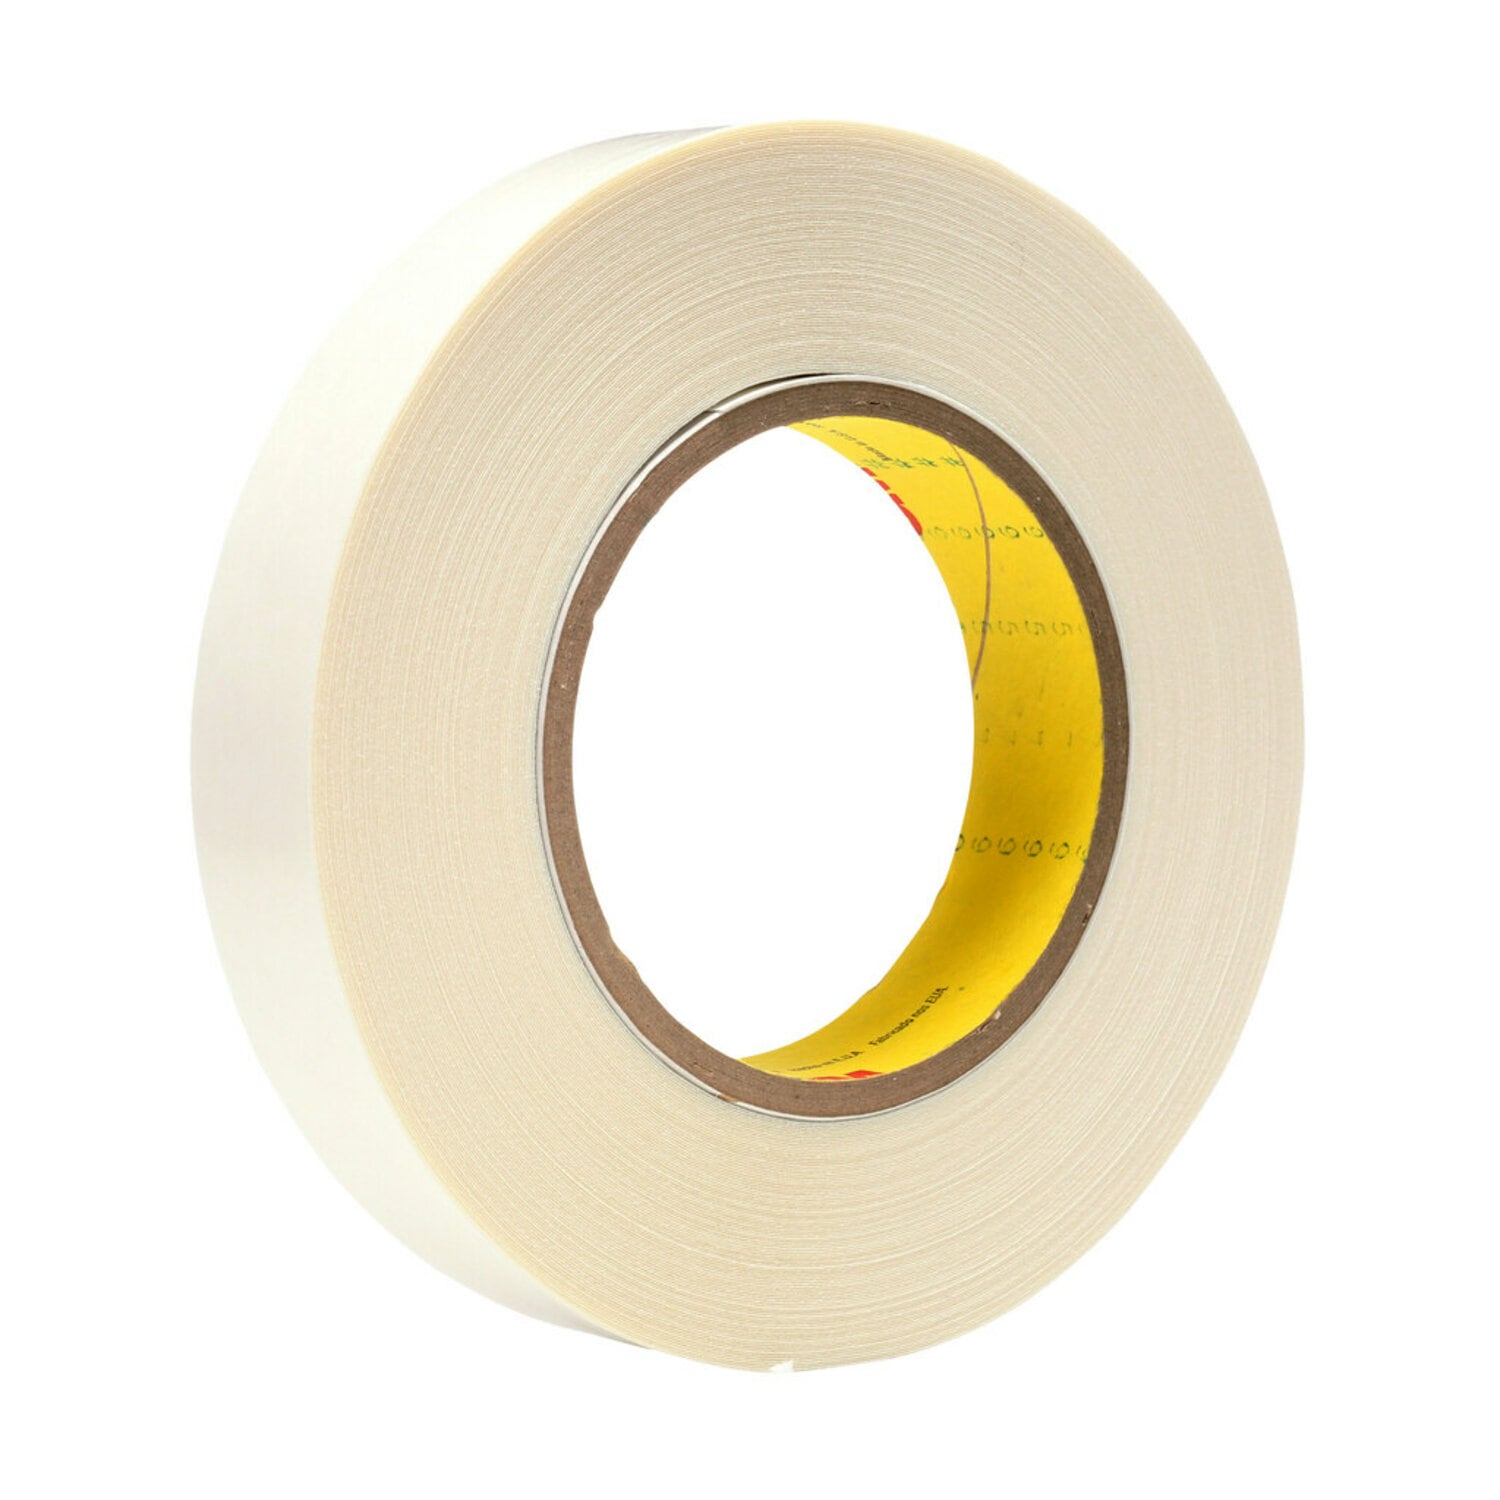 7000123506 - 3M Double Coated Tape 9579, White, 1 in x 36 yd, 9 mil, 36 rolls per
case